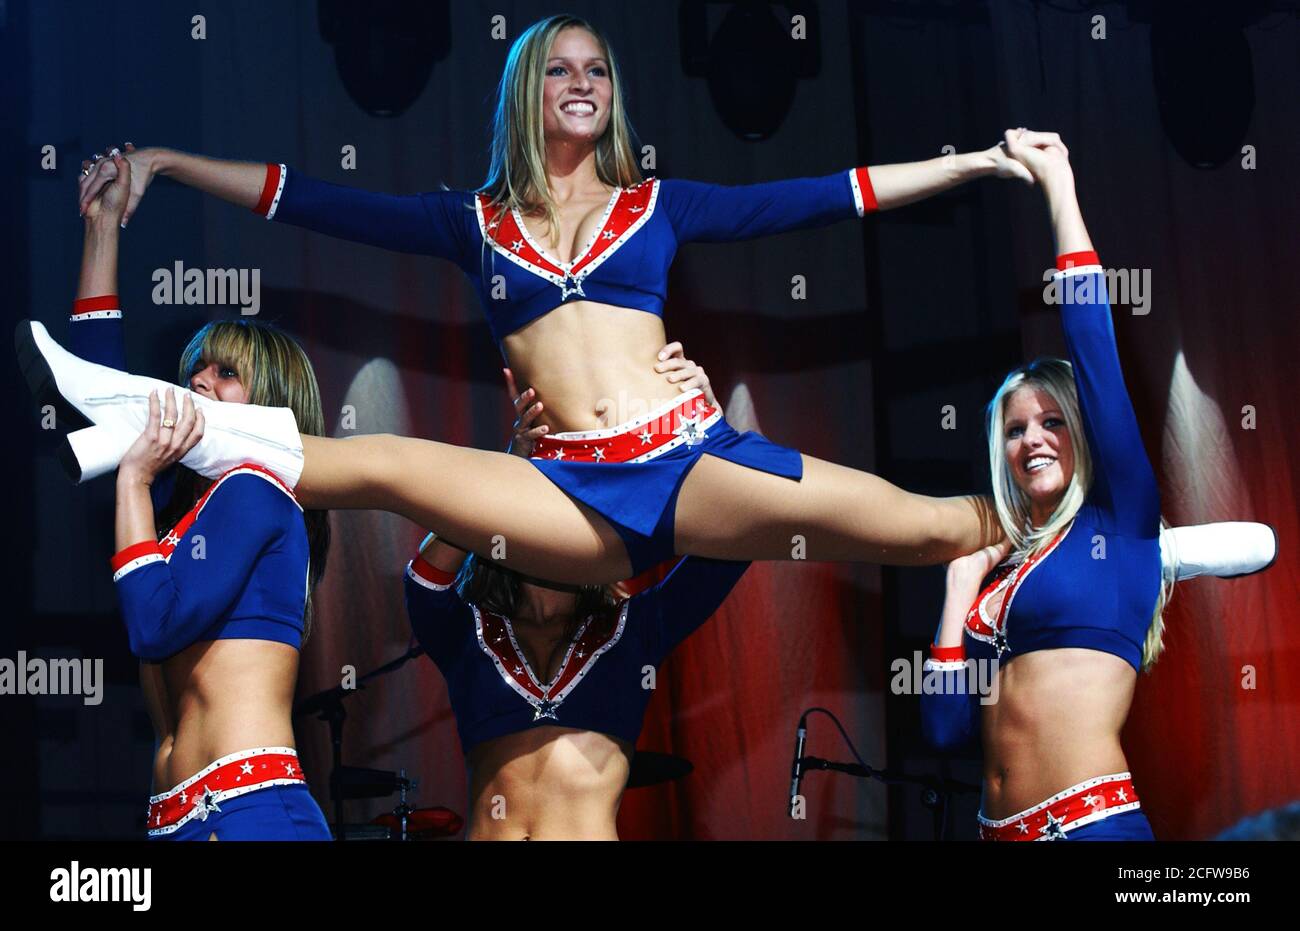 2004 - Cheerleaders from the New England Patriots professional football team perform during an Operation Seasons Greetings concert at Hangar 814 at Royal Air Force Mildenhall, England on Dec.14, 2004. Stock Photo